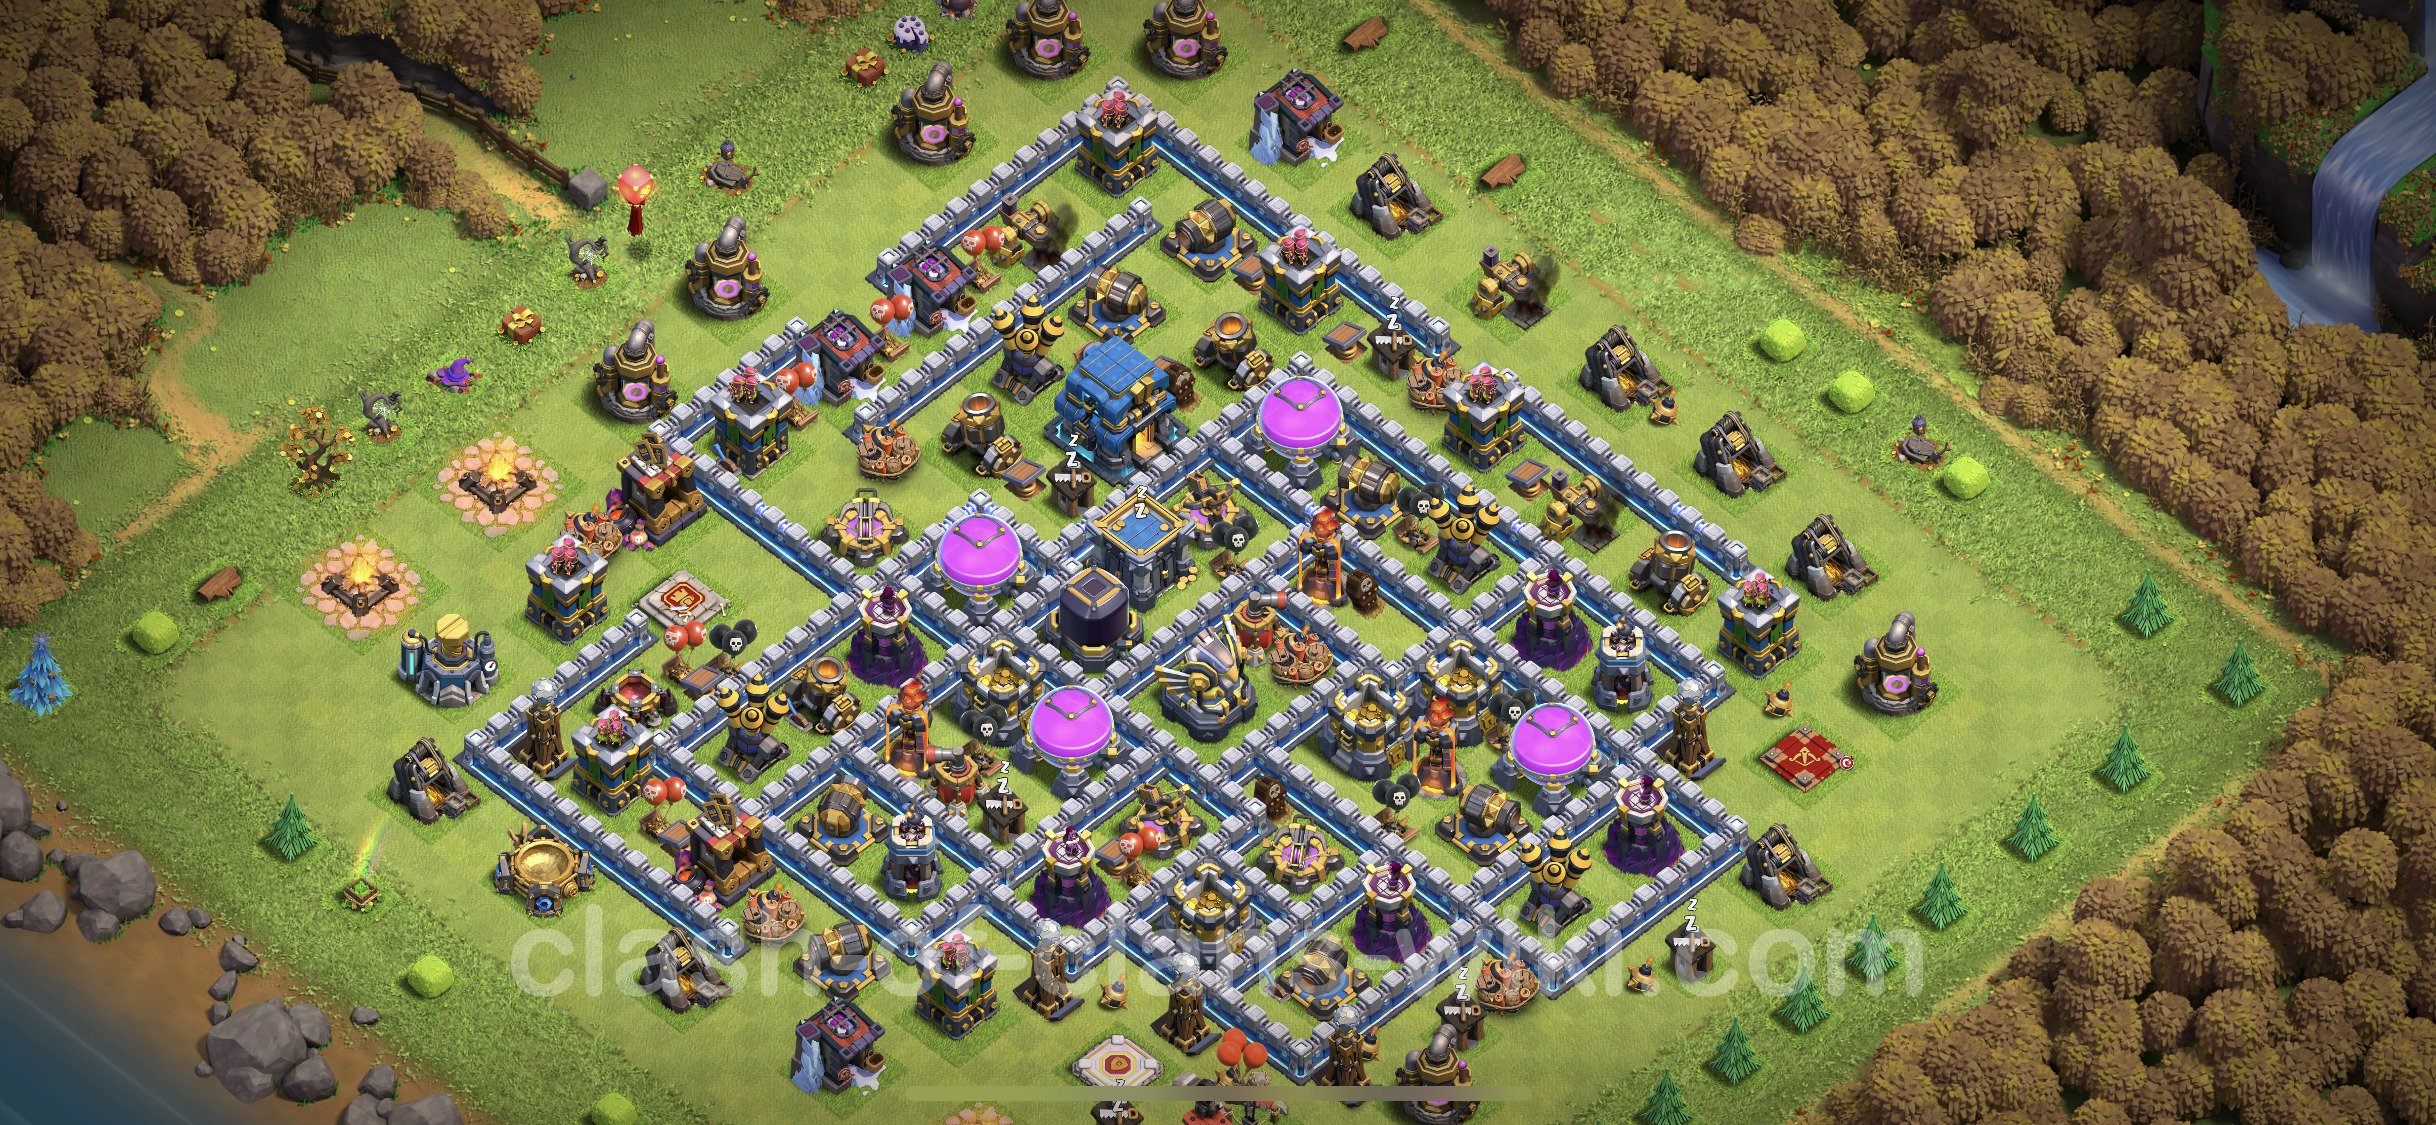 Farming Base TH12 Max Levels with Link, Hybrid - plan / layout / design - C...